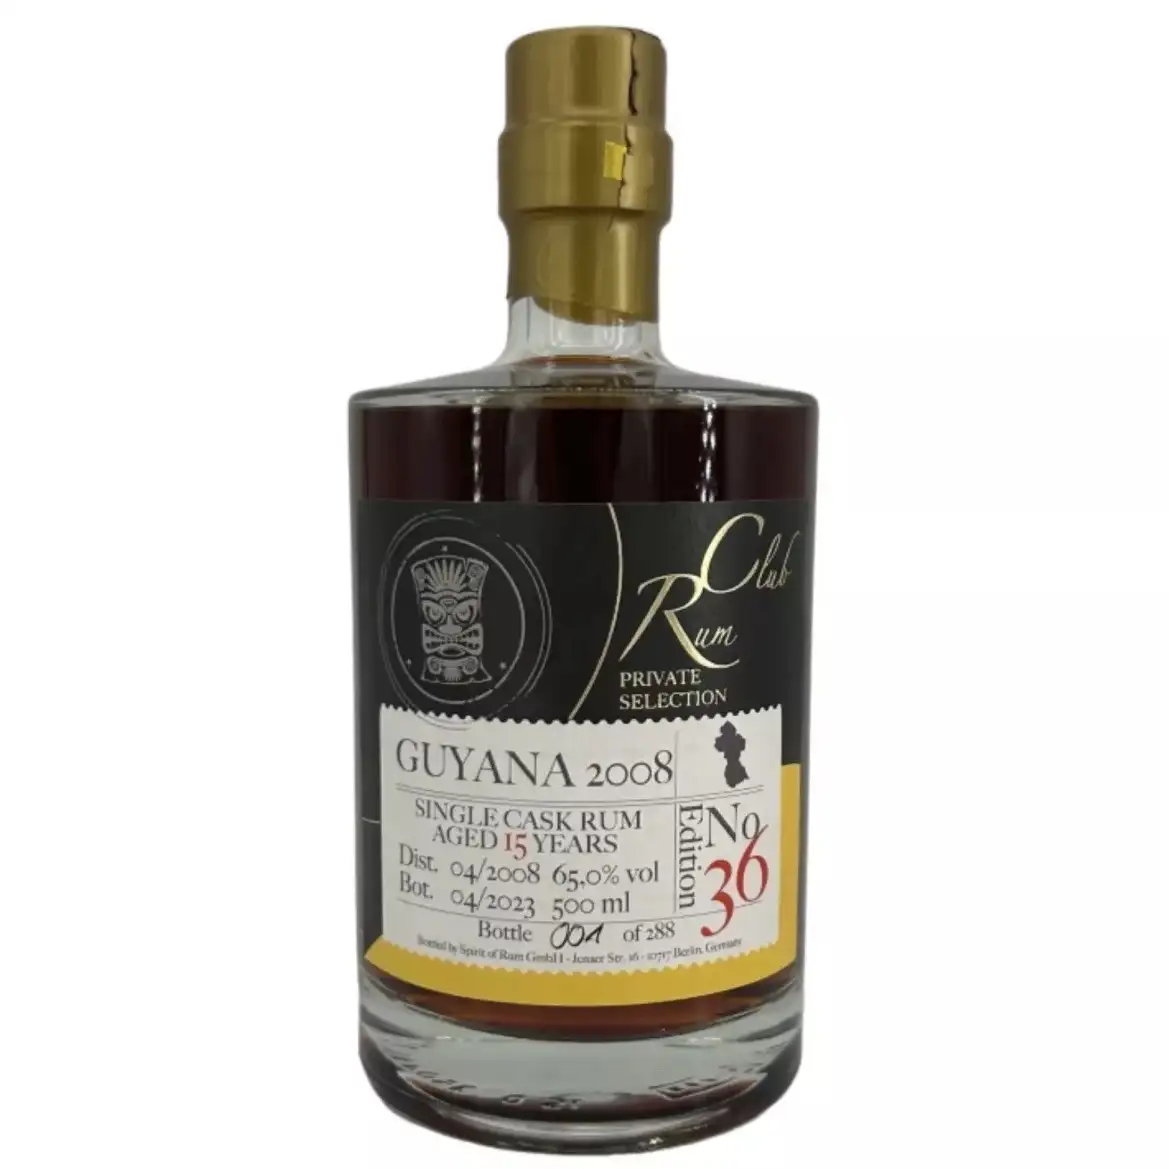 Image of the front of the bottle of the rum Rumclub Private Selection Ed. 36 MDS